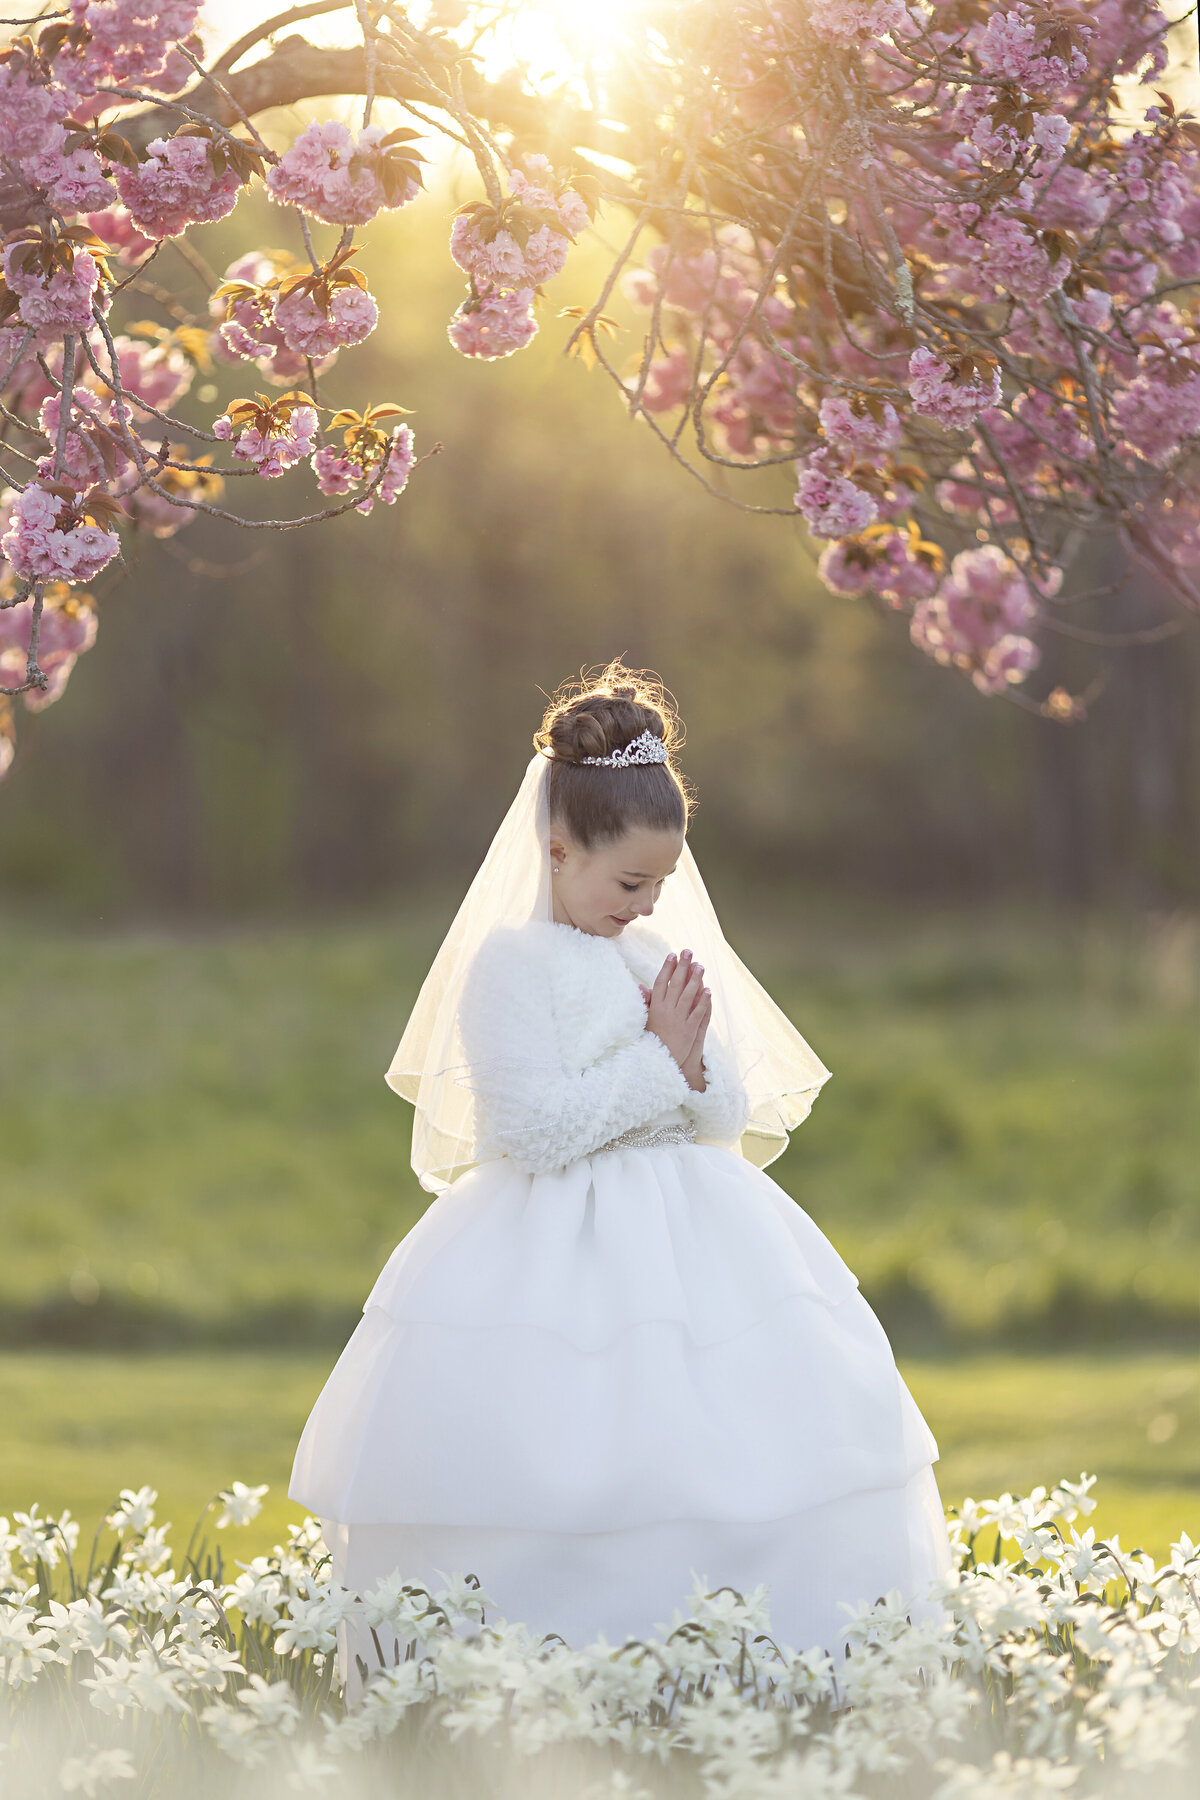 A praying young girl in a communion dress and tiara in a field of wildflowers at sunset under a pink tree